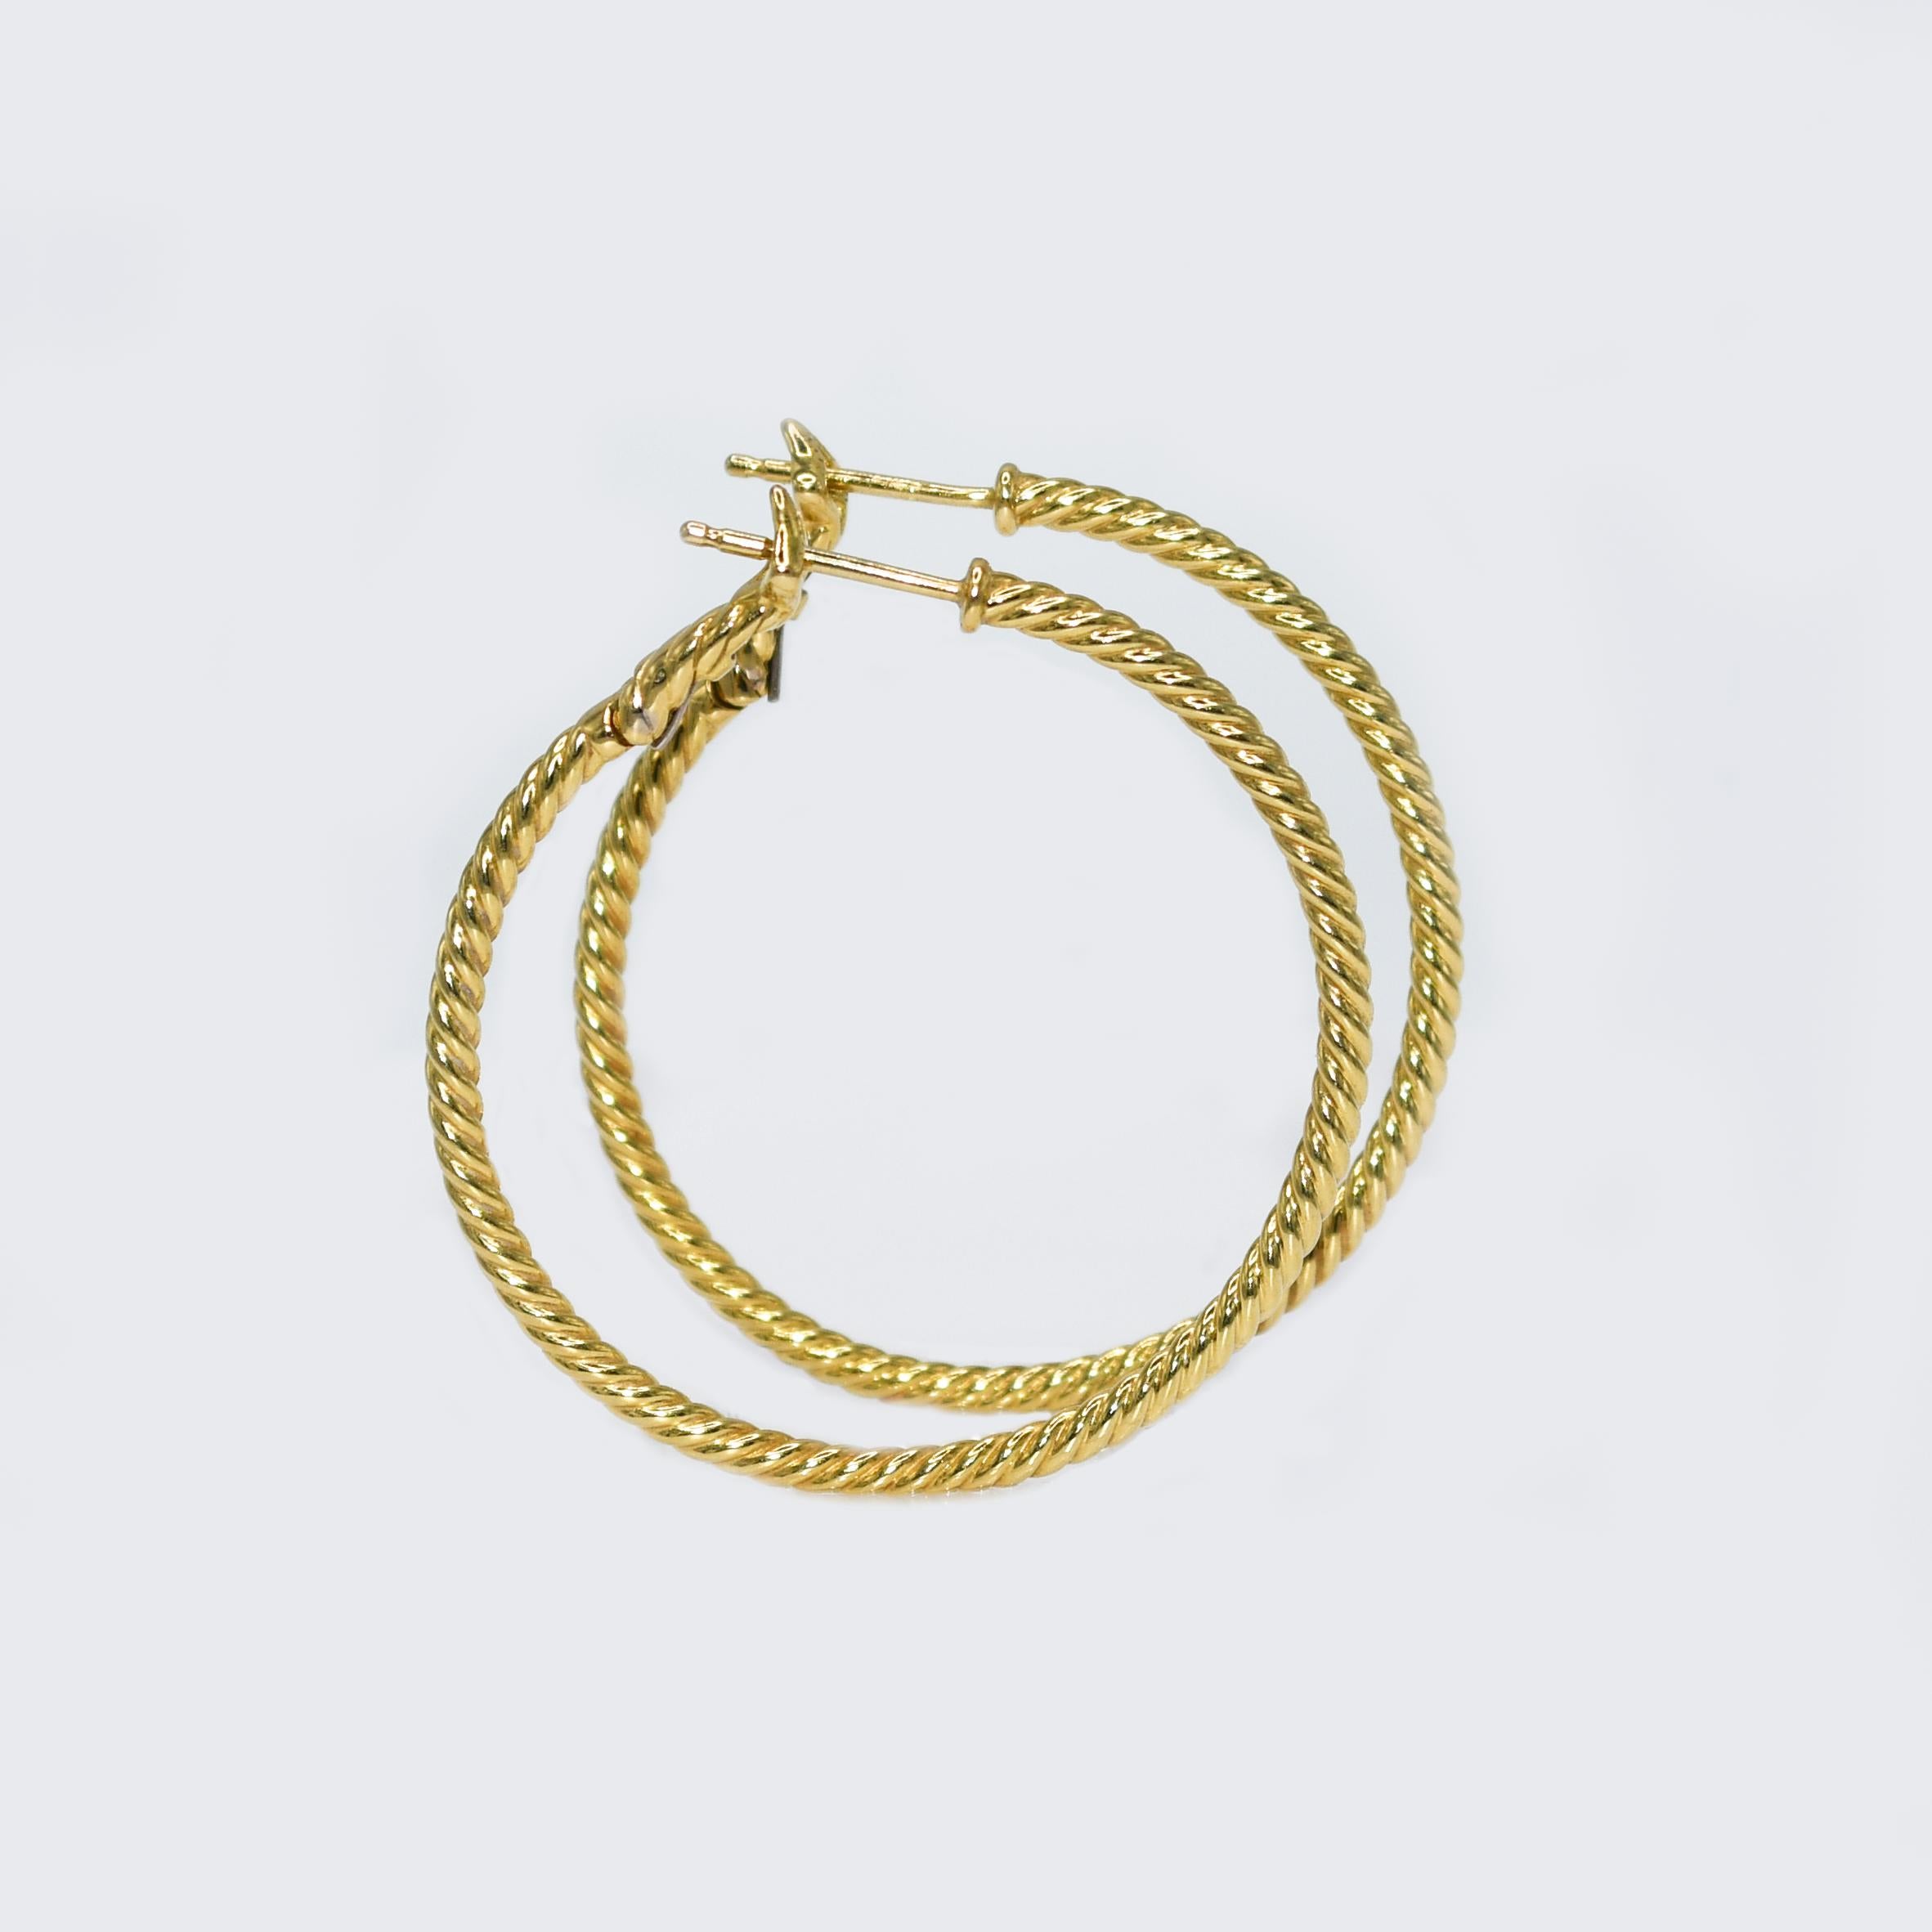 18K Yellow Gold David Yurman Hoop Earrings Cable Spira, 6.8g
David Yurman 18k yellow gold spira cable hoop earrings.
Stamped D.Y. 750 M and weigh 6.8 grams.
The hoops measure 2.1mm thick and 1 3/8 inches in diameter.
Comes with David Yurman